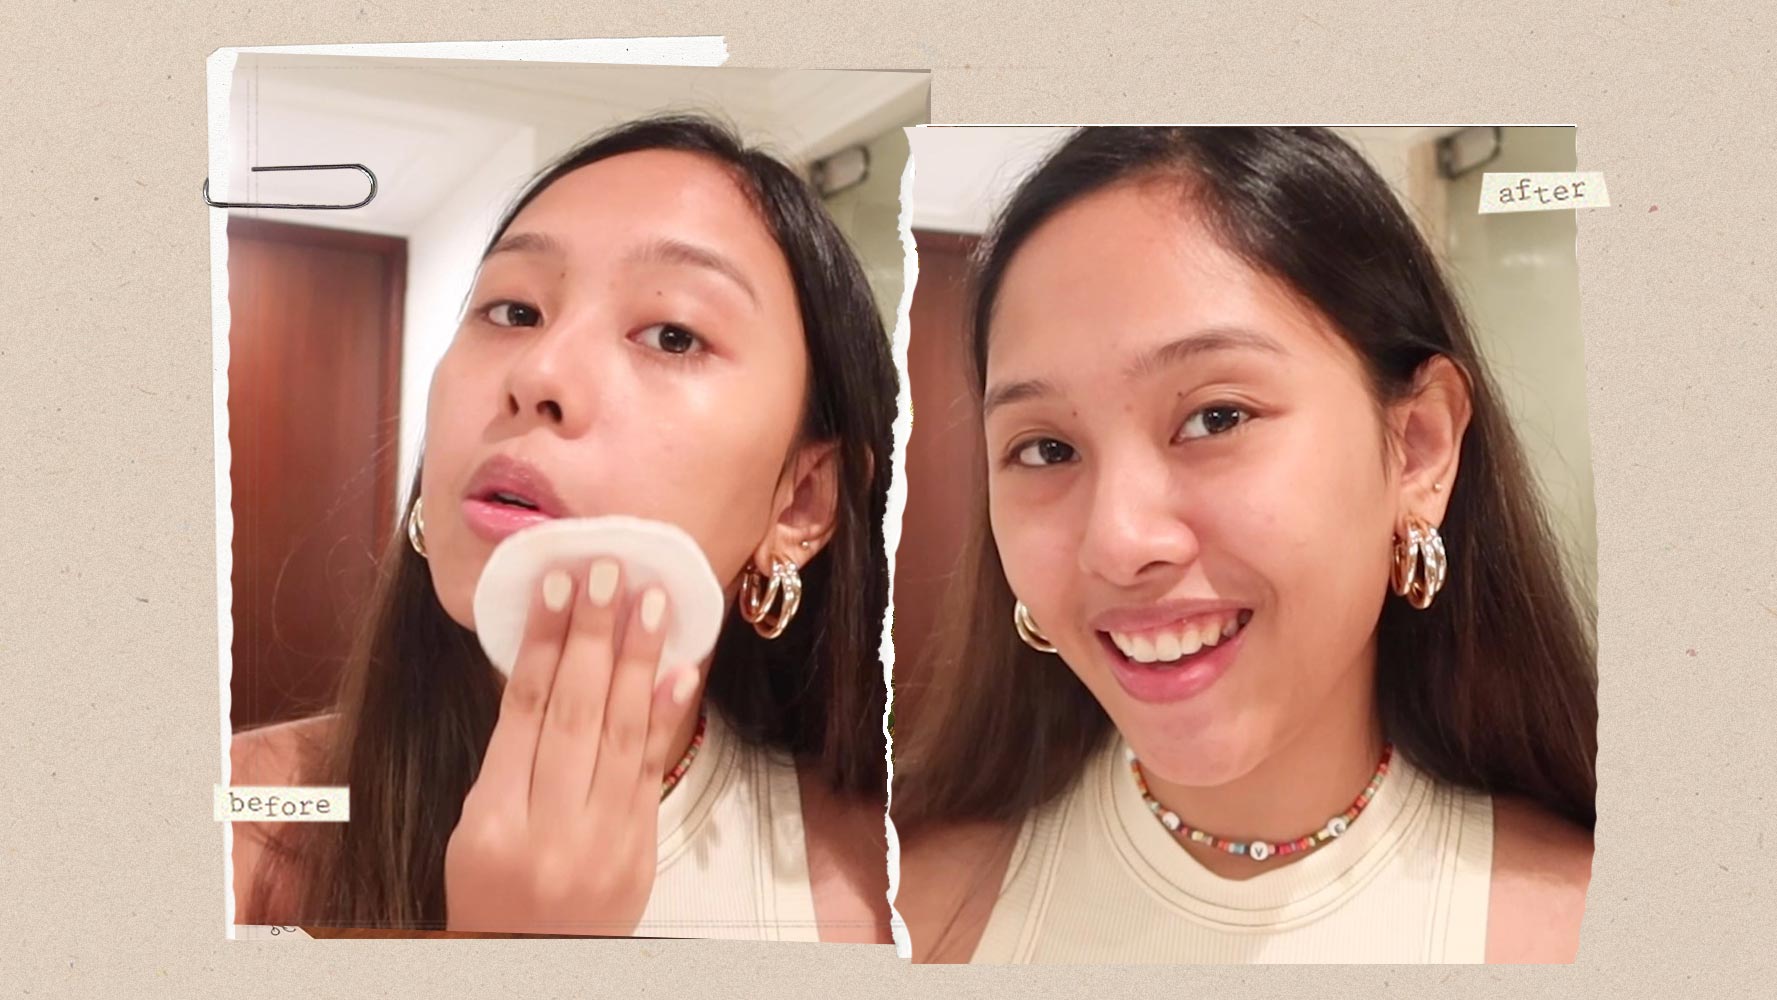 Here's How A Morena Does Her Anti-acne Skincare Routine For Dry Skin